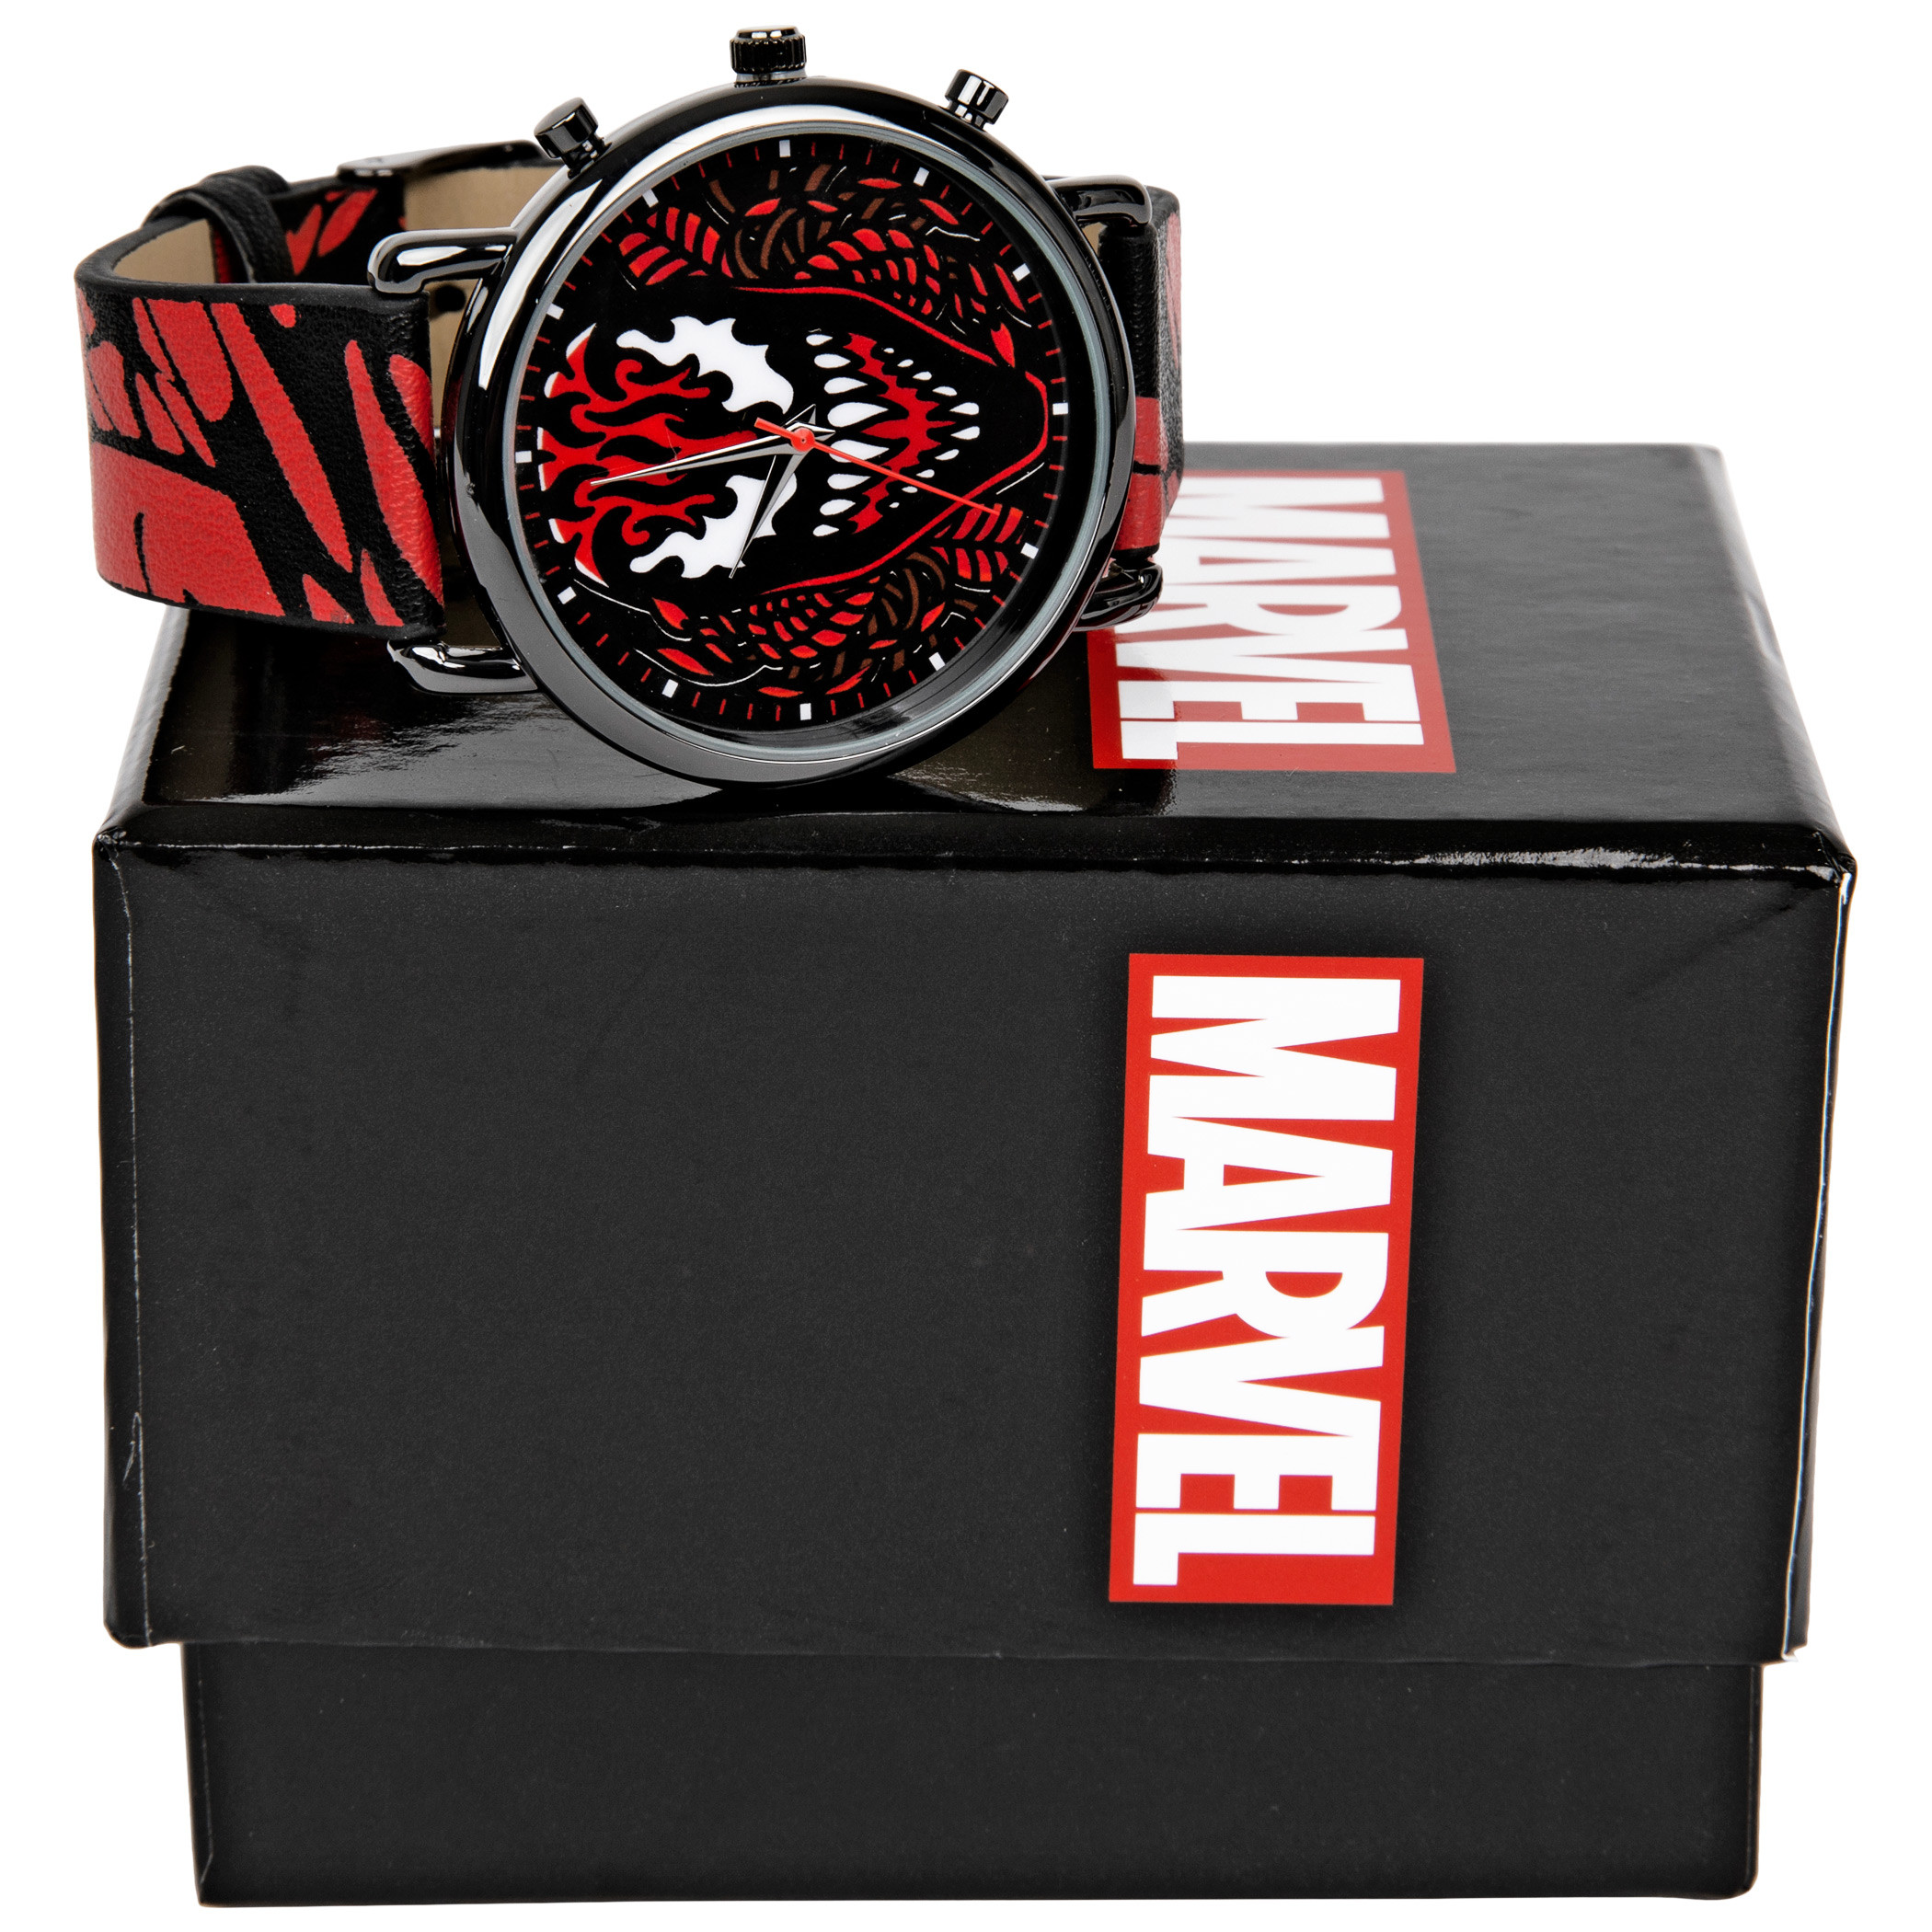 Carnage Face and Symbiote Watch with Faux Leather Strap